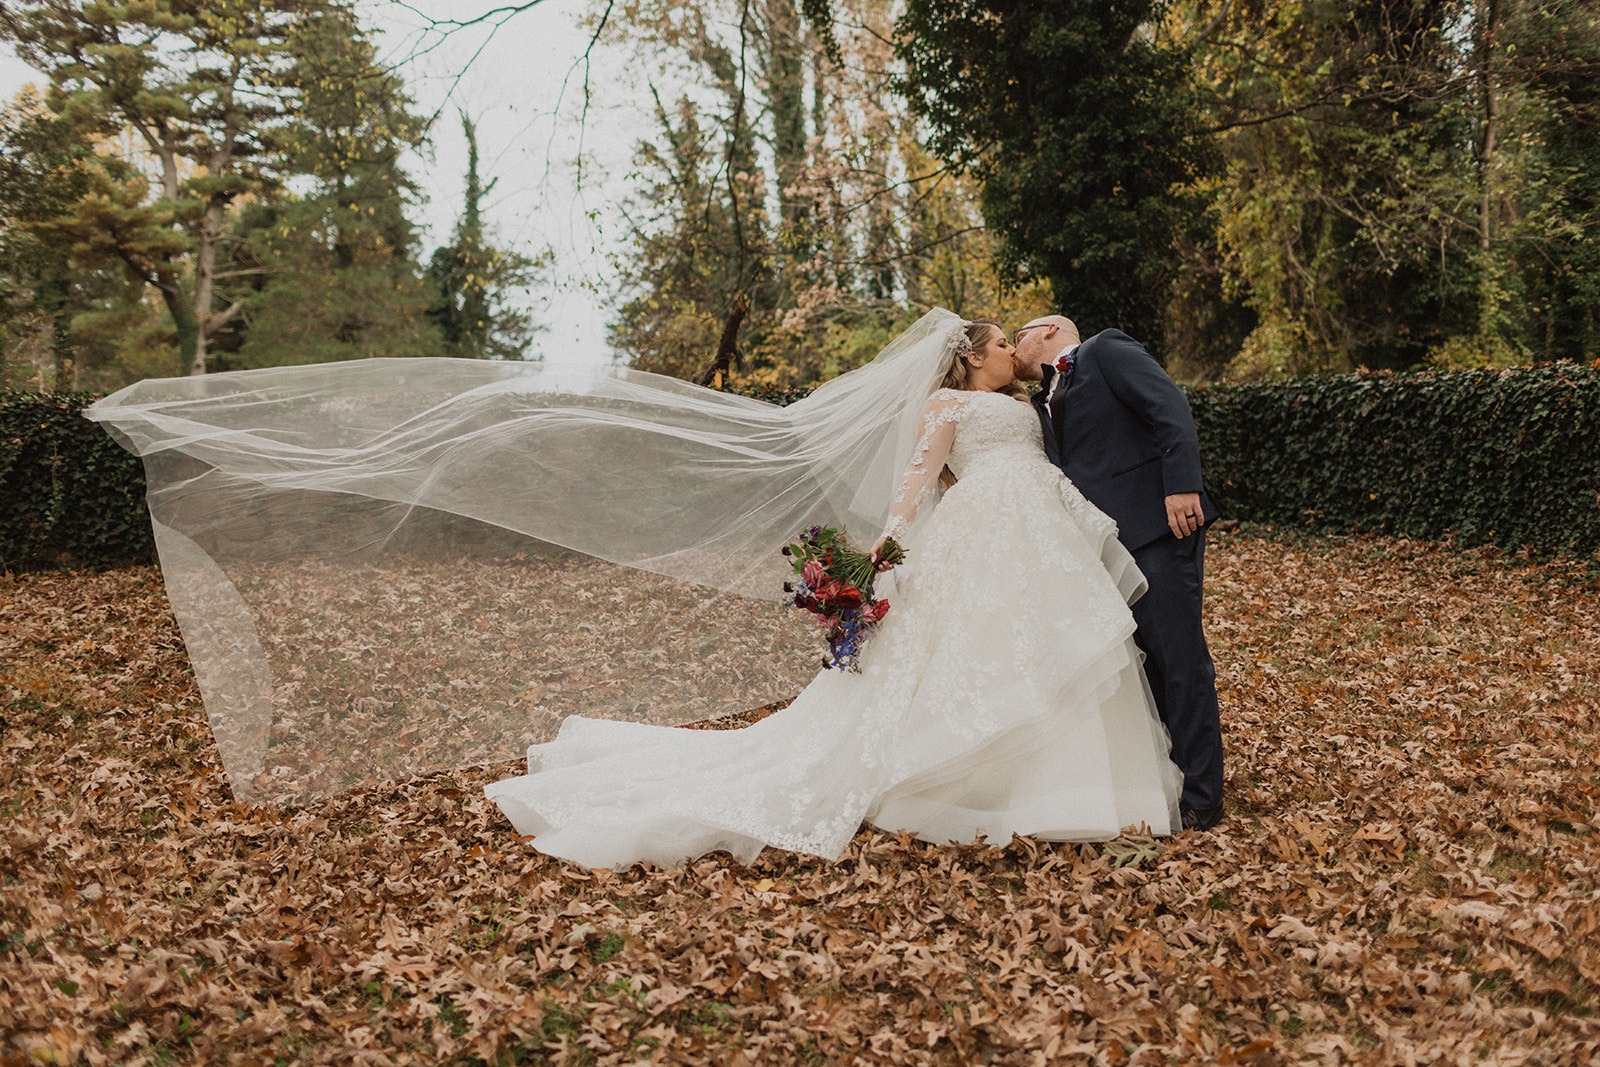 couple kisses with veil in wind at fall outdoor wedding